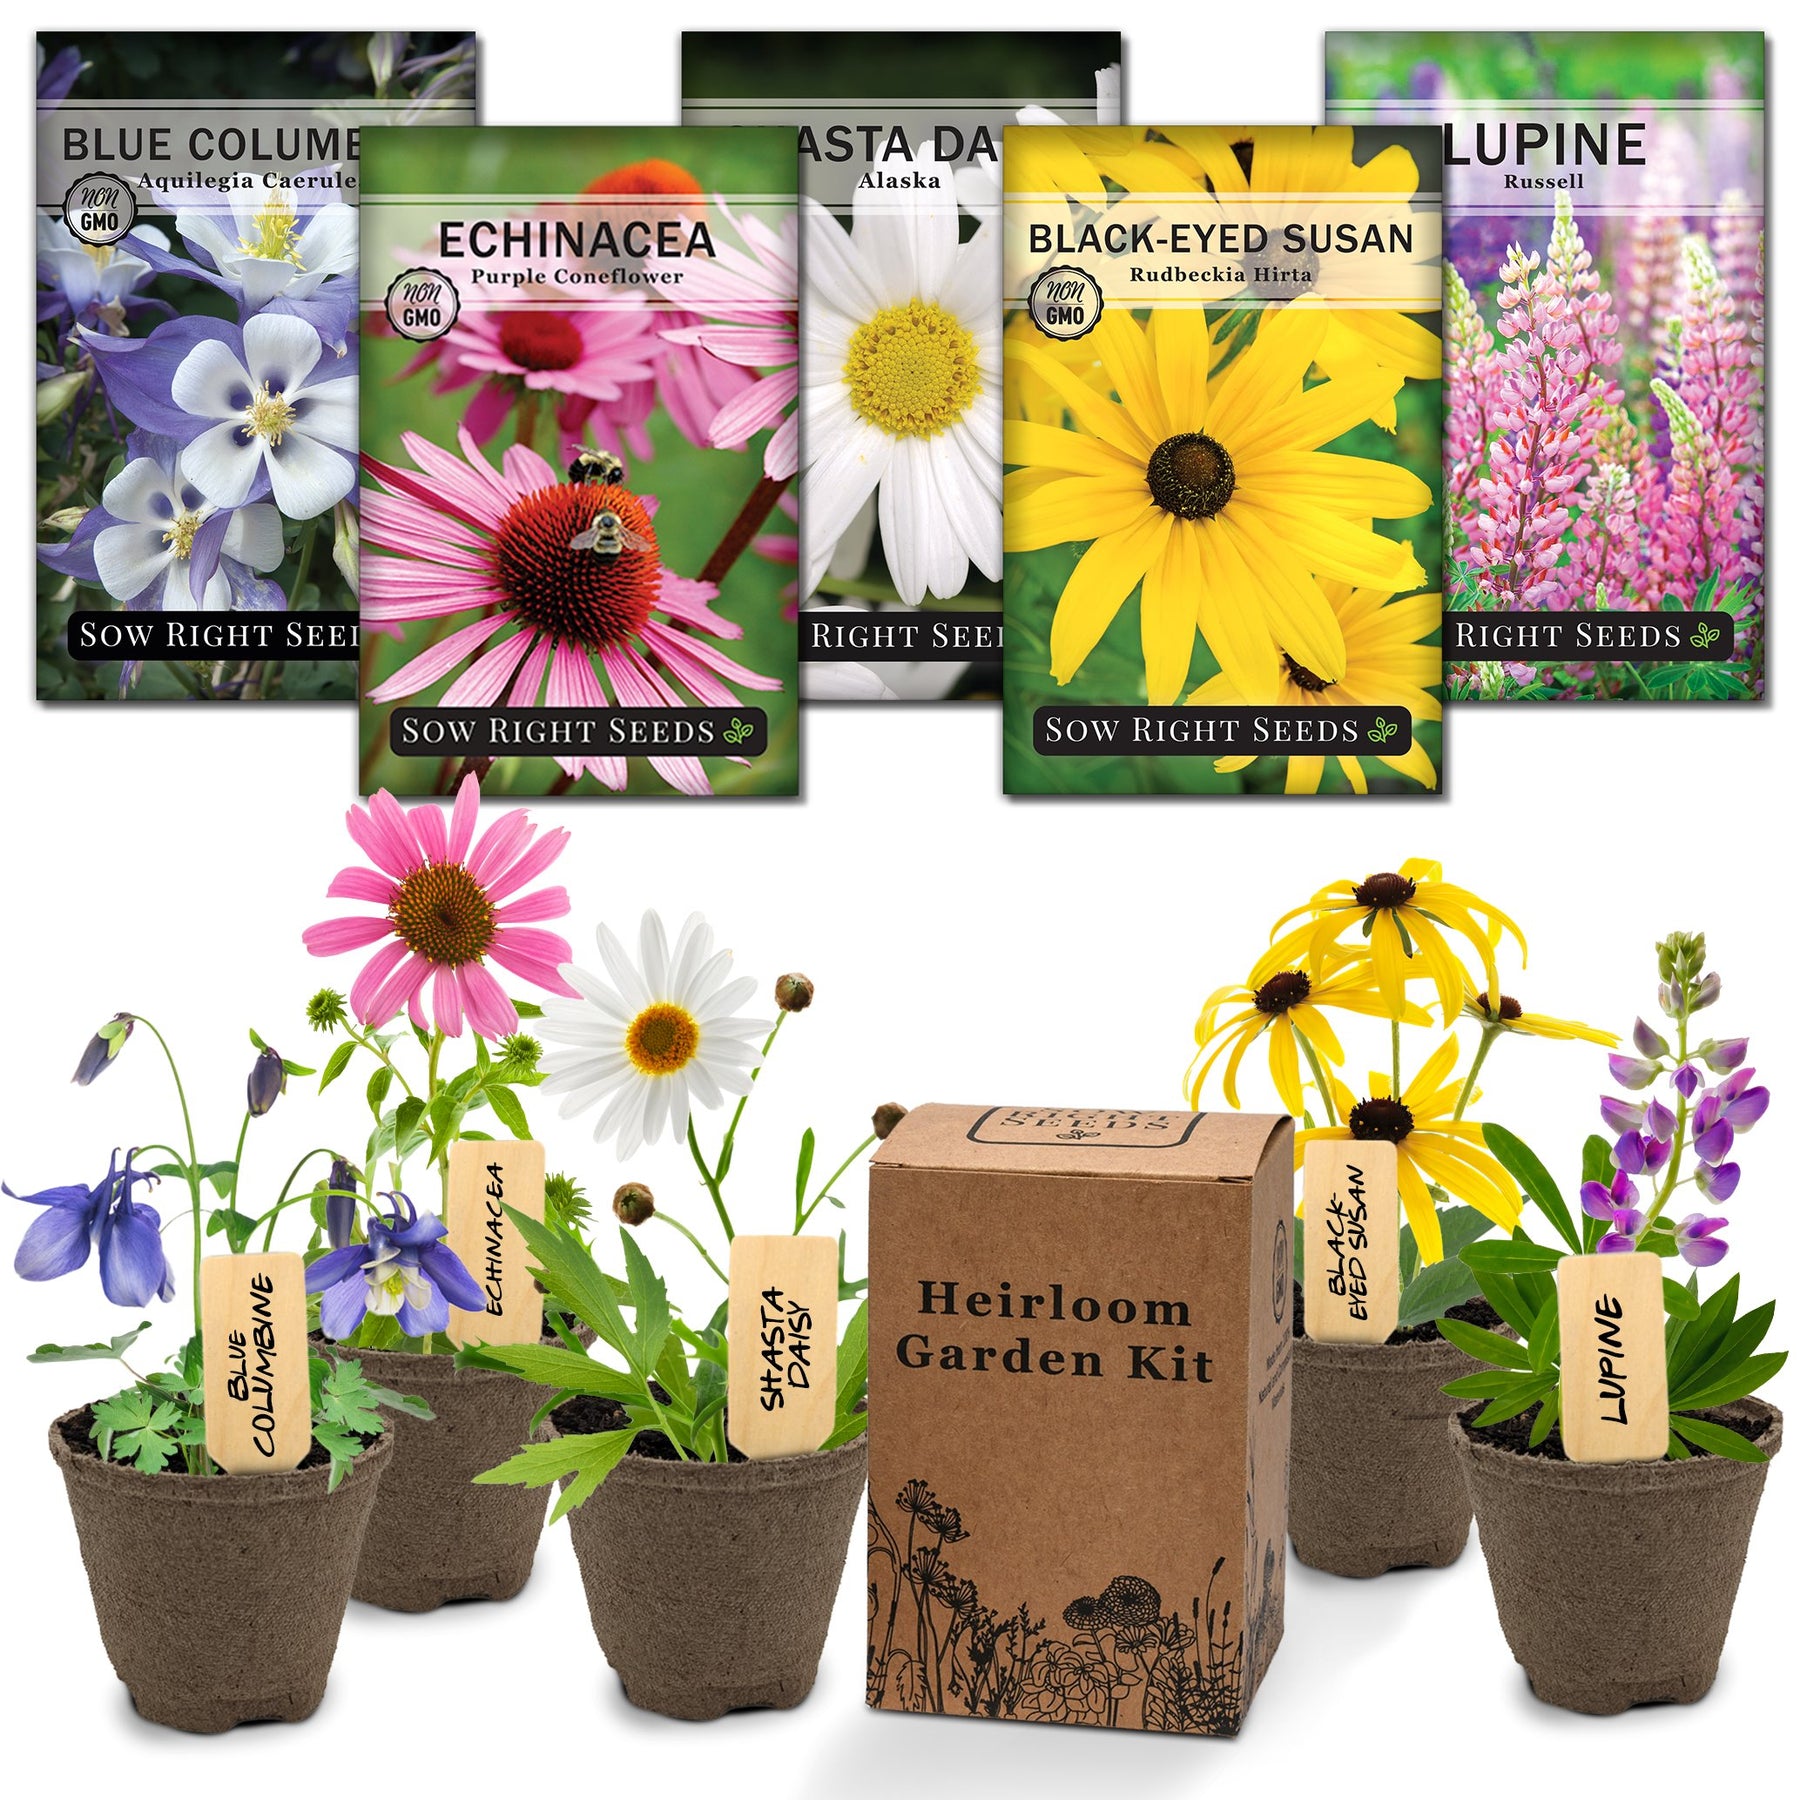 Sow Right Seeds - Heirloom Perennial Flower Seeds Flower Growing Kit - 5 Flower Varieties - Pots & Potting Soil - Non-GMO Packets with Instructions